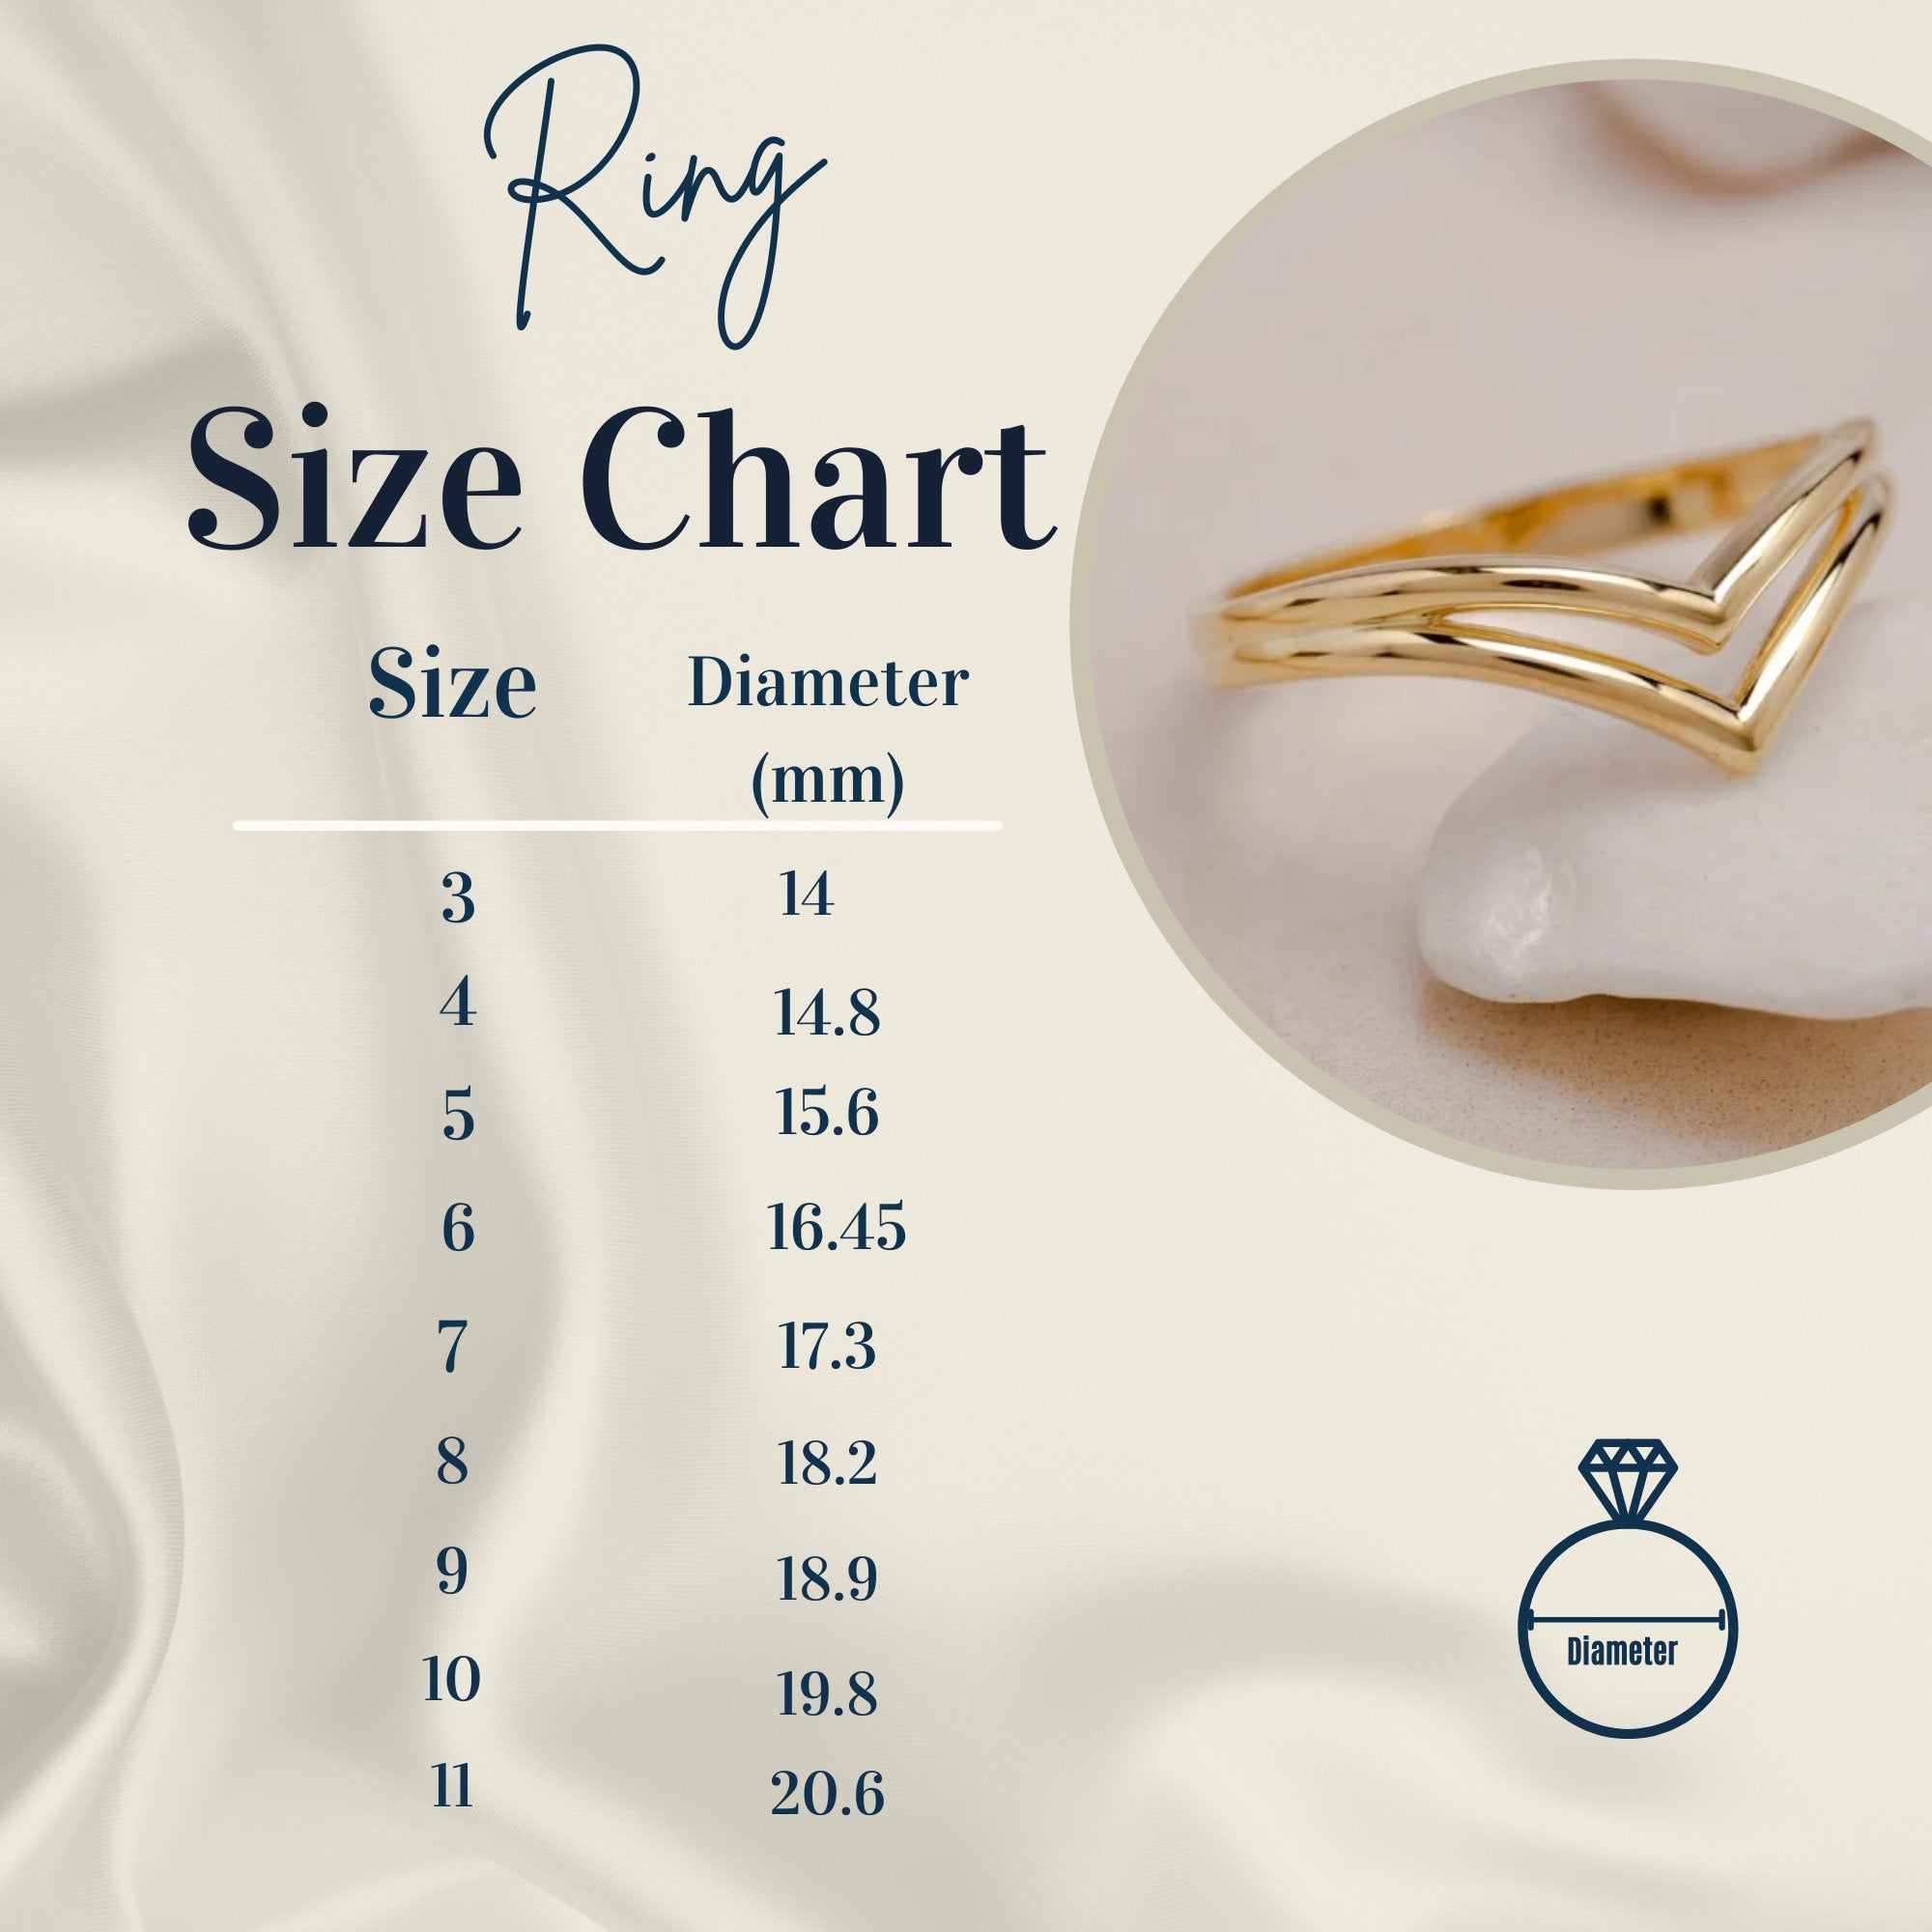 14K Gold Heart Rhythm Ring, Lifeline Pulse Ring, Love Heartbeat Ring, 925 Sterling Silver Handmade Heart Rhtym Ring, Gift for Wife and Gift